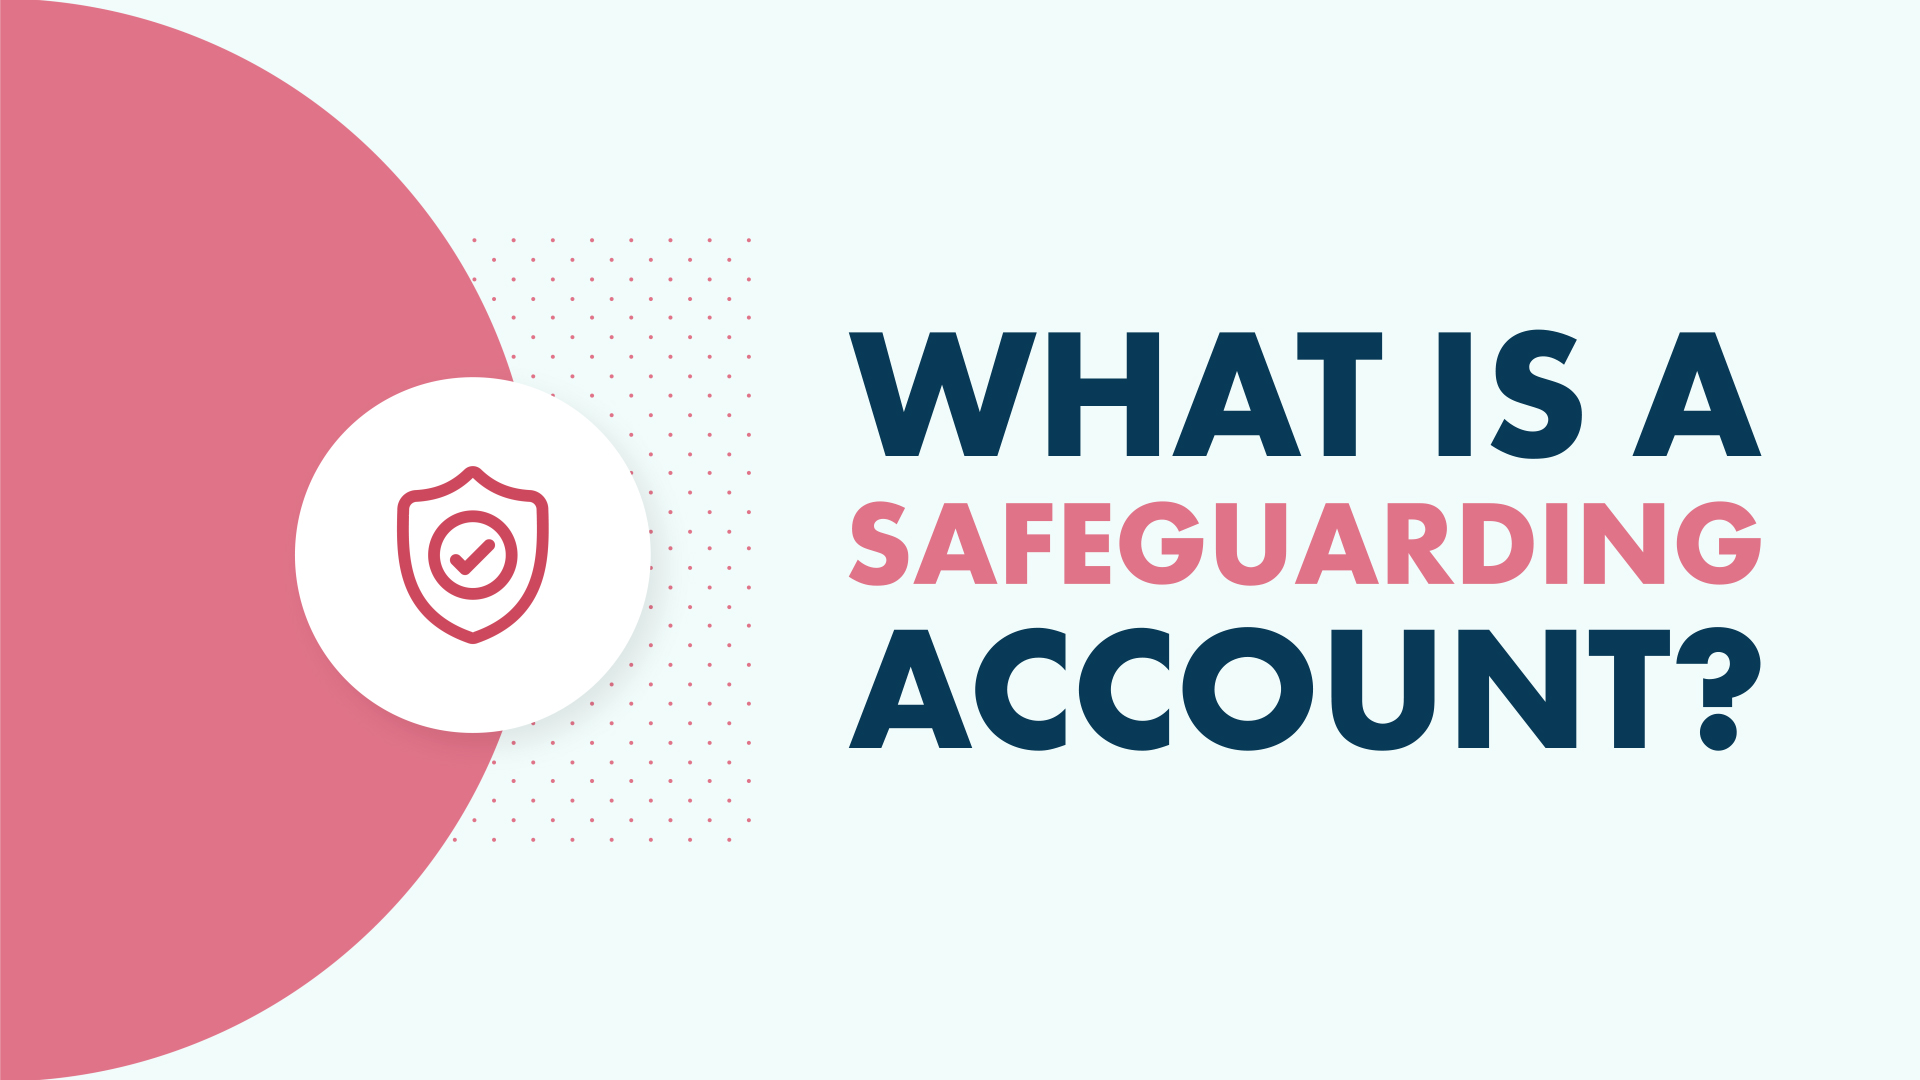 Safeguarding accounts: How, what, why?